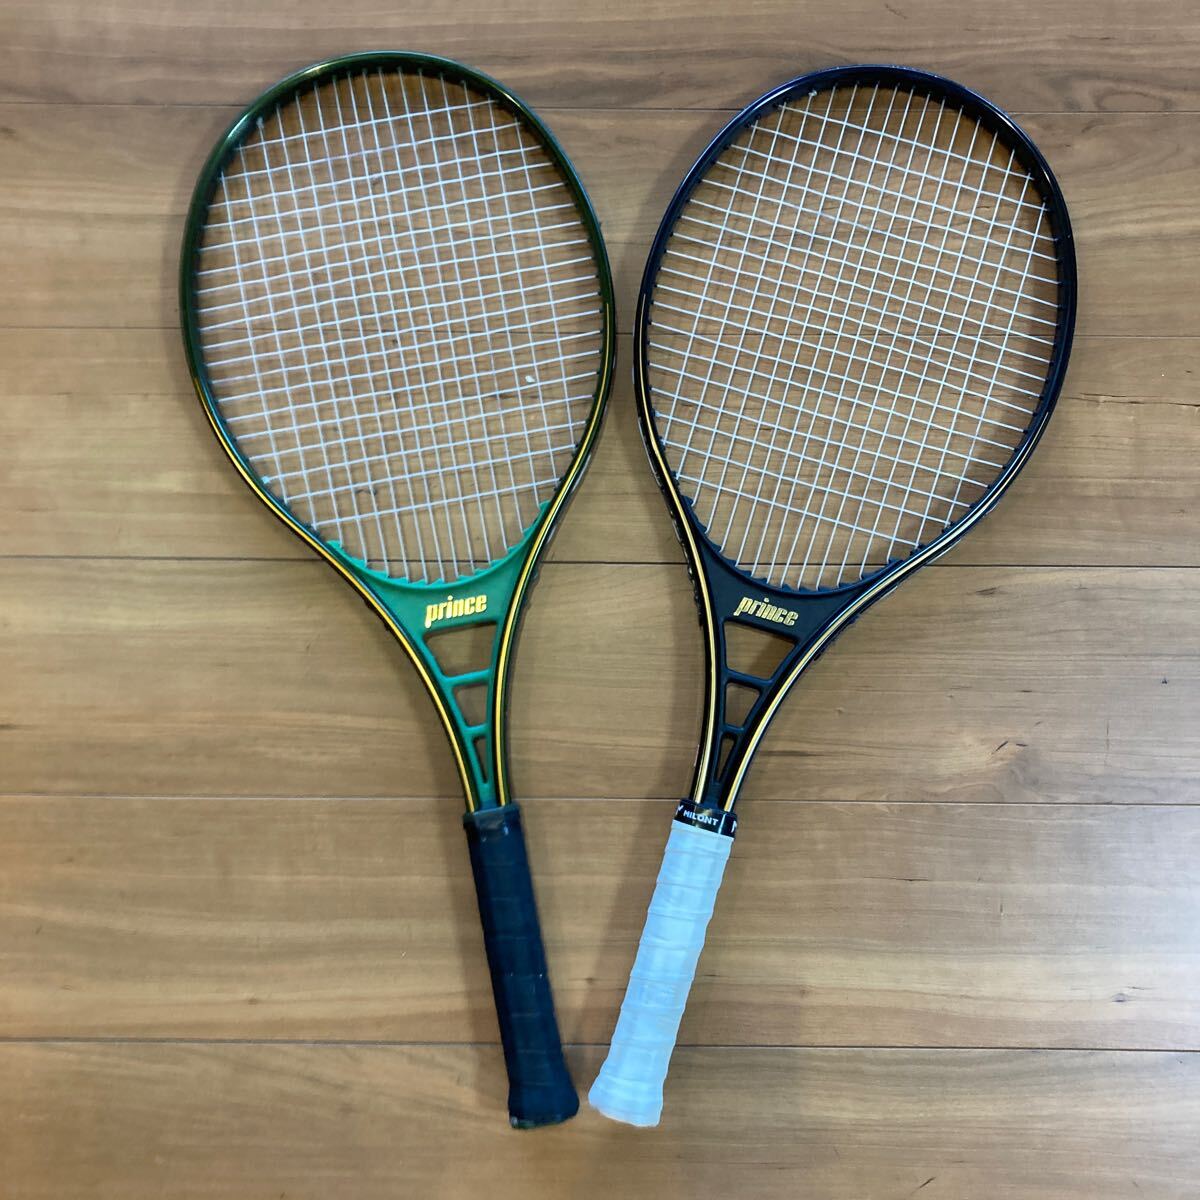  Prince the first period. oversize racket 2 ps 